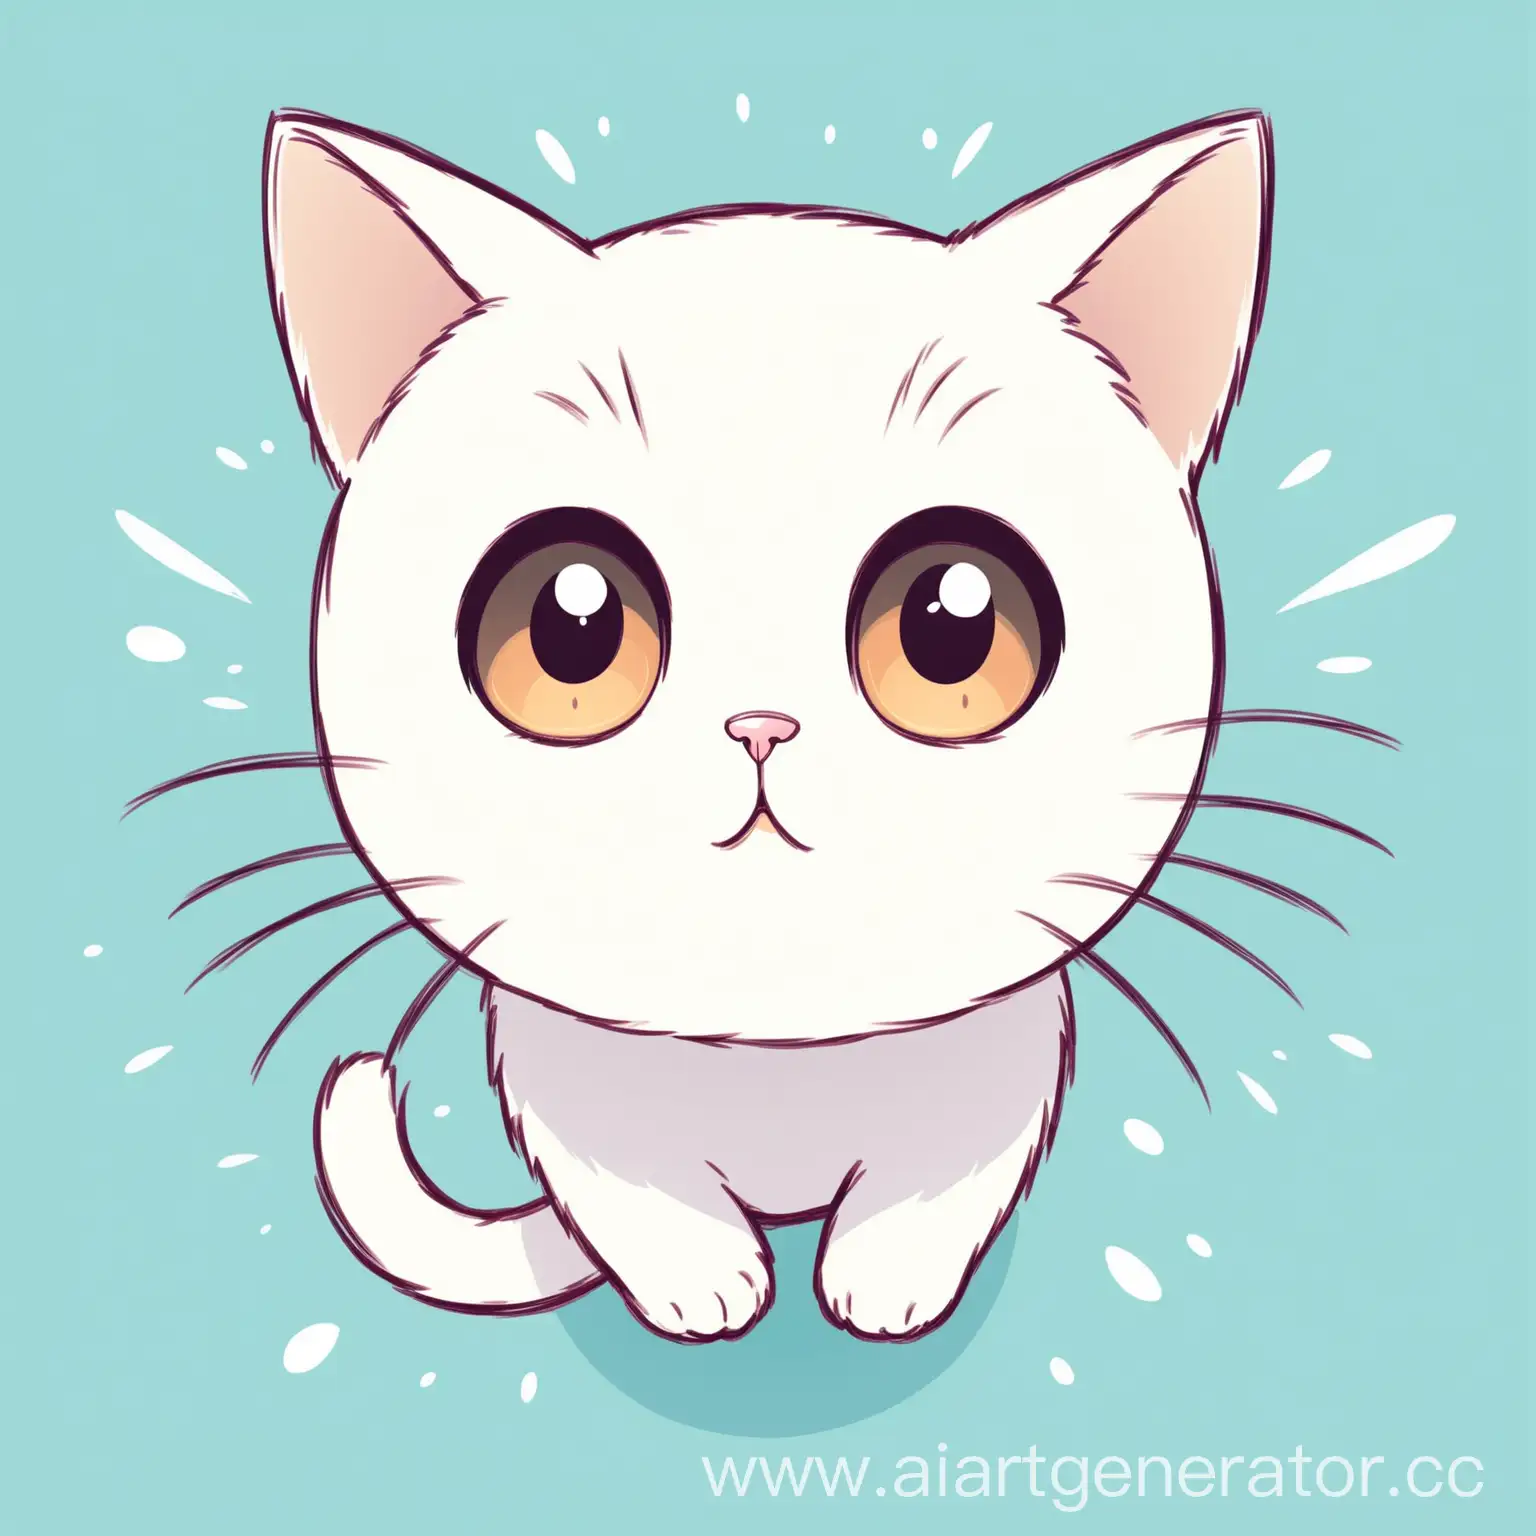 Simple-Linear-White-Cat-with-Big-Eyes-Looking-Up